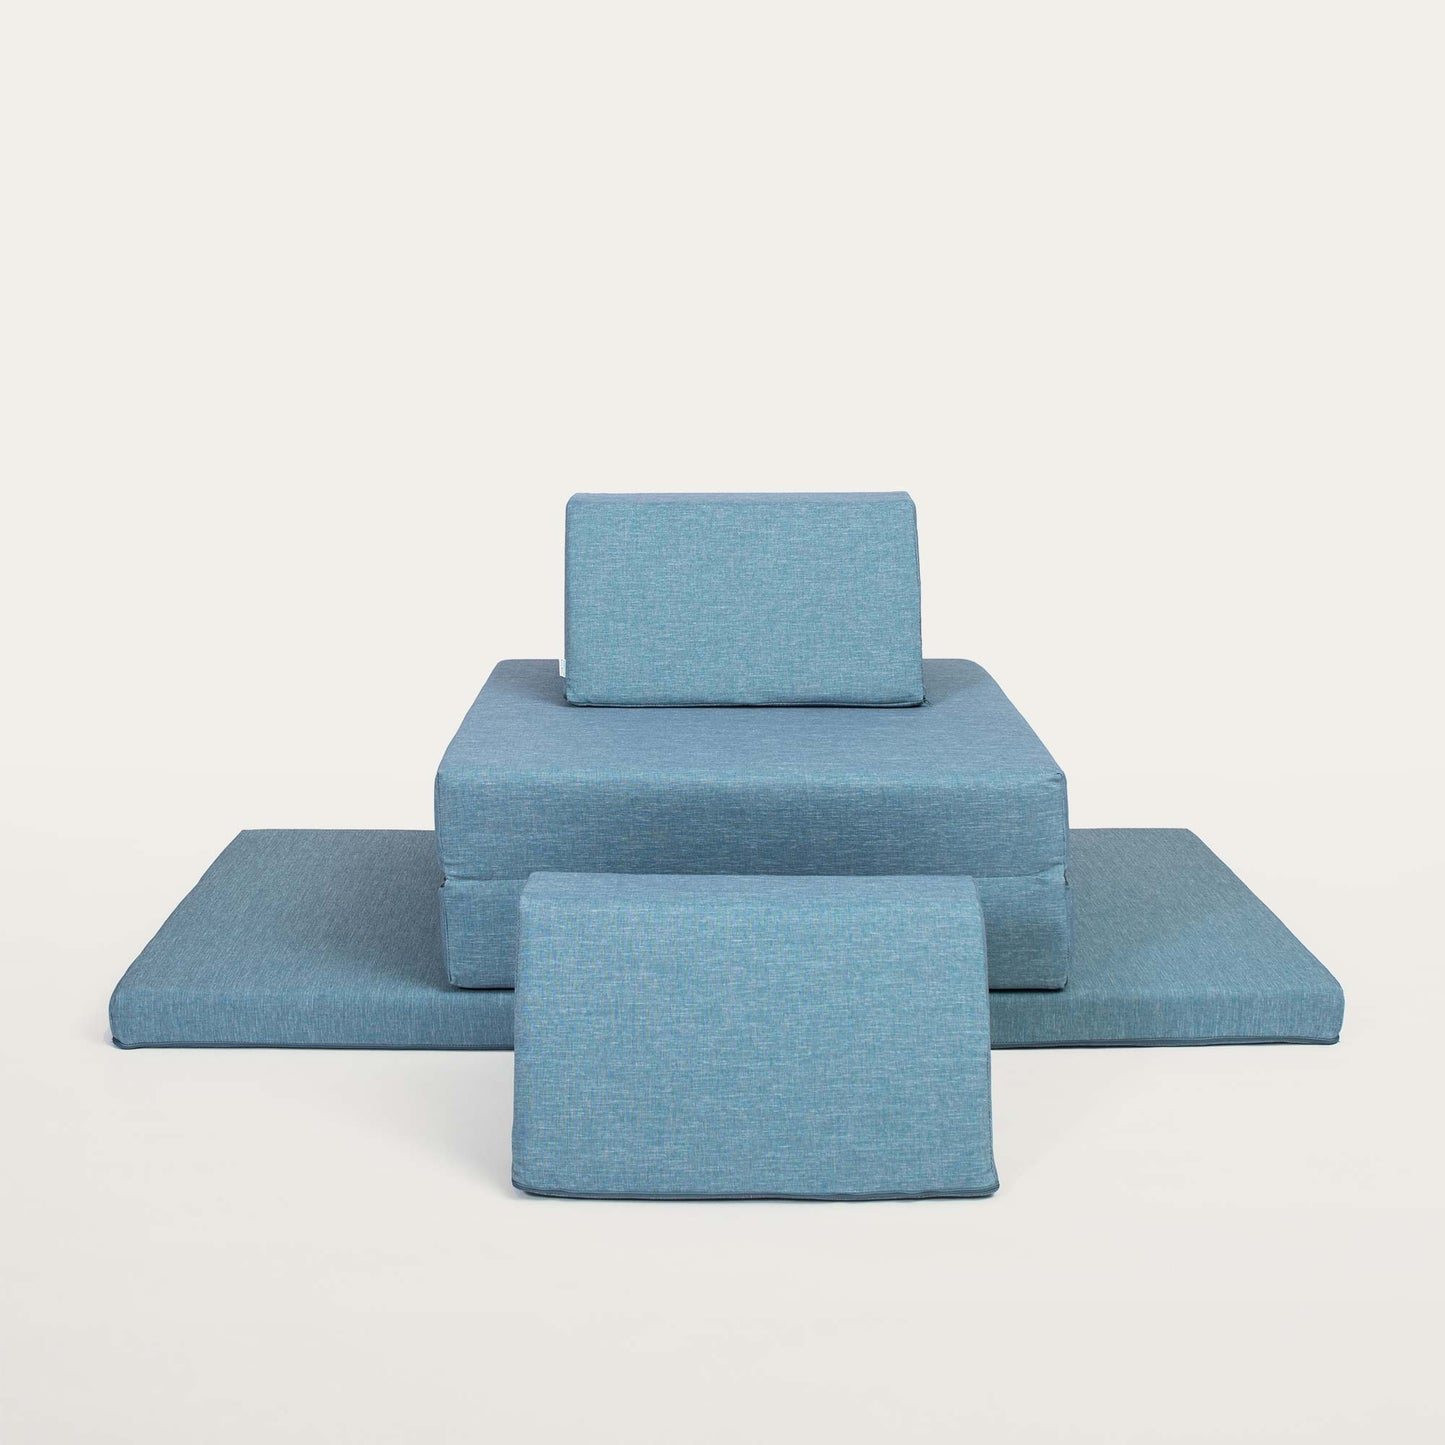 A turquoise Monboxy soft foam activity sofa arranged into a table and chair shape